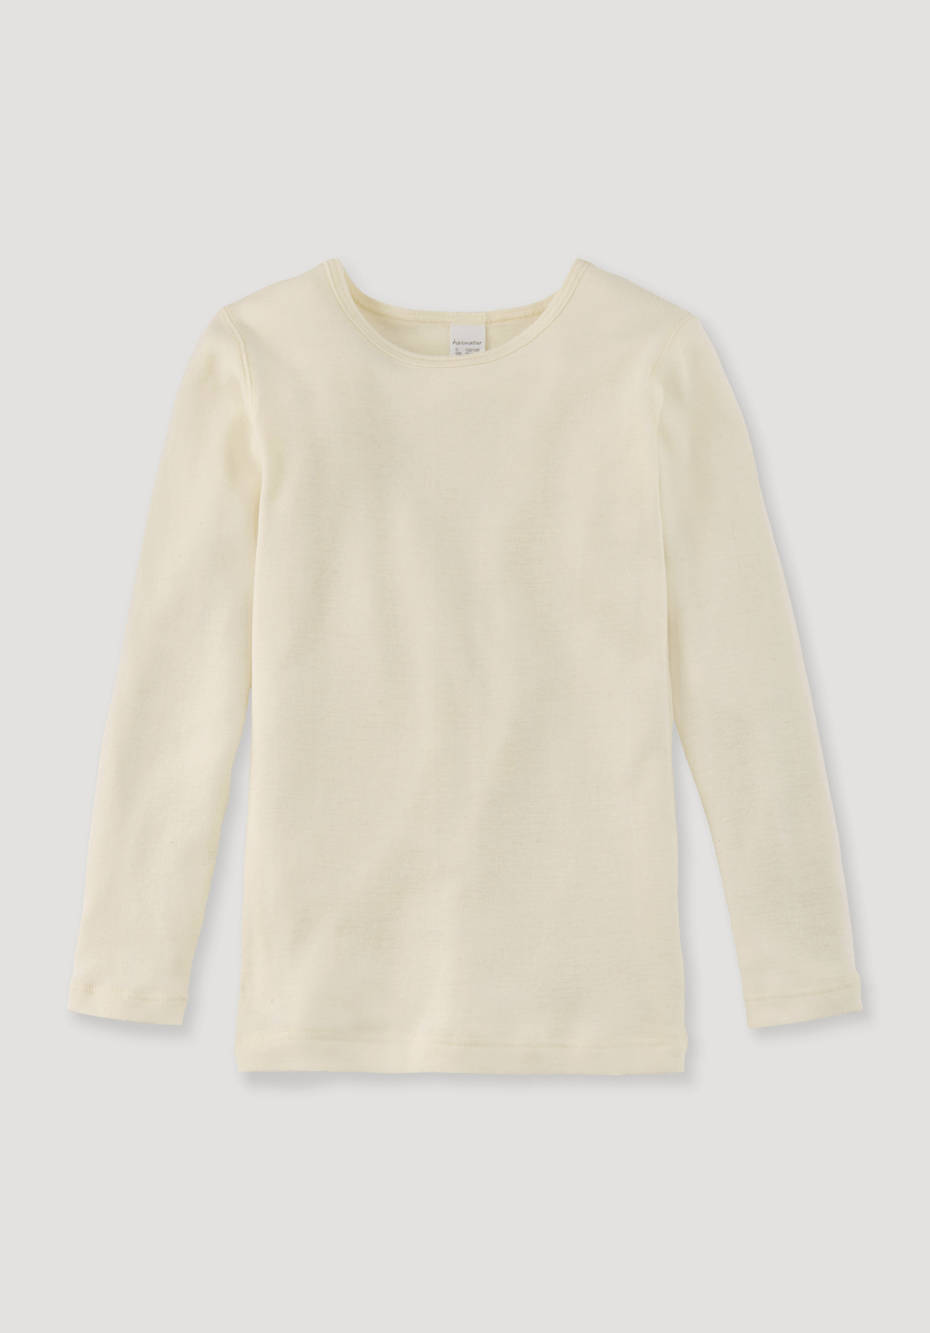 Long-sleeved shirt made from organic cotton with organic new wool and silk